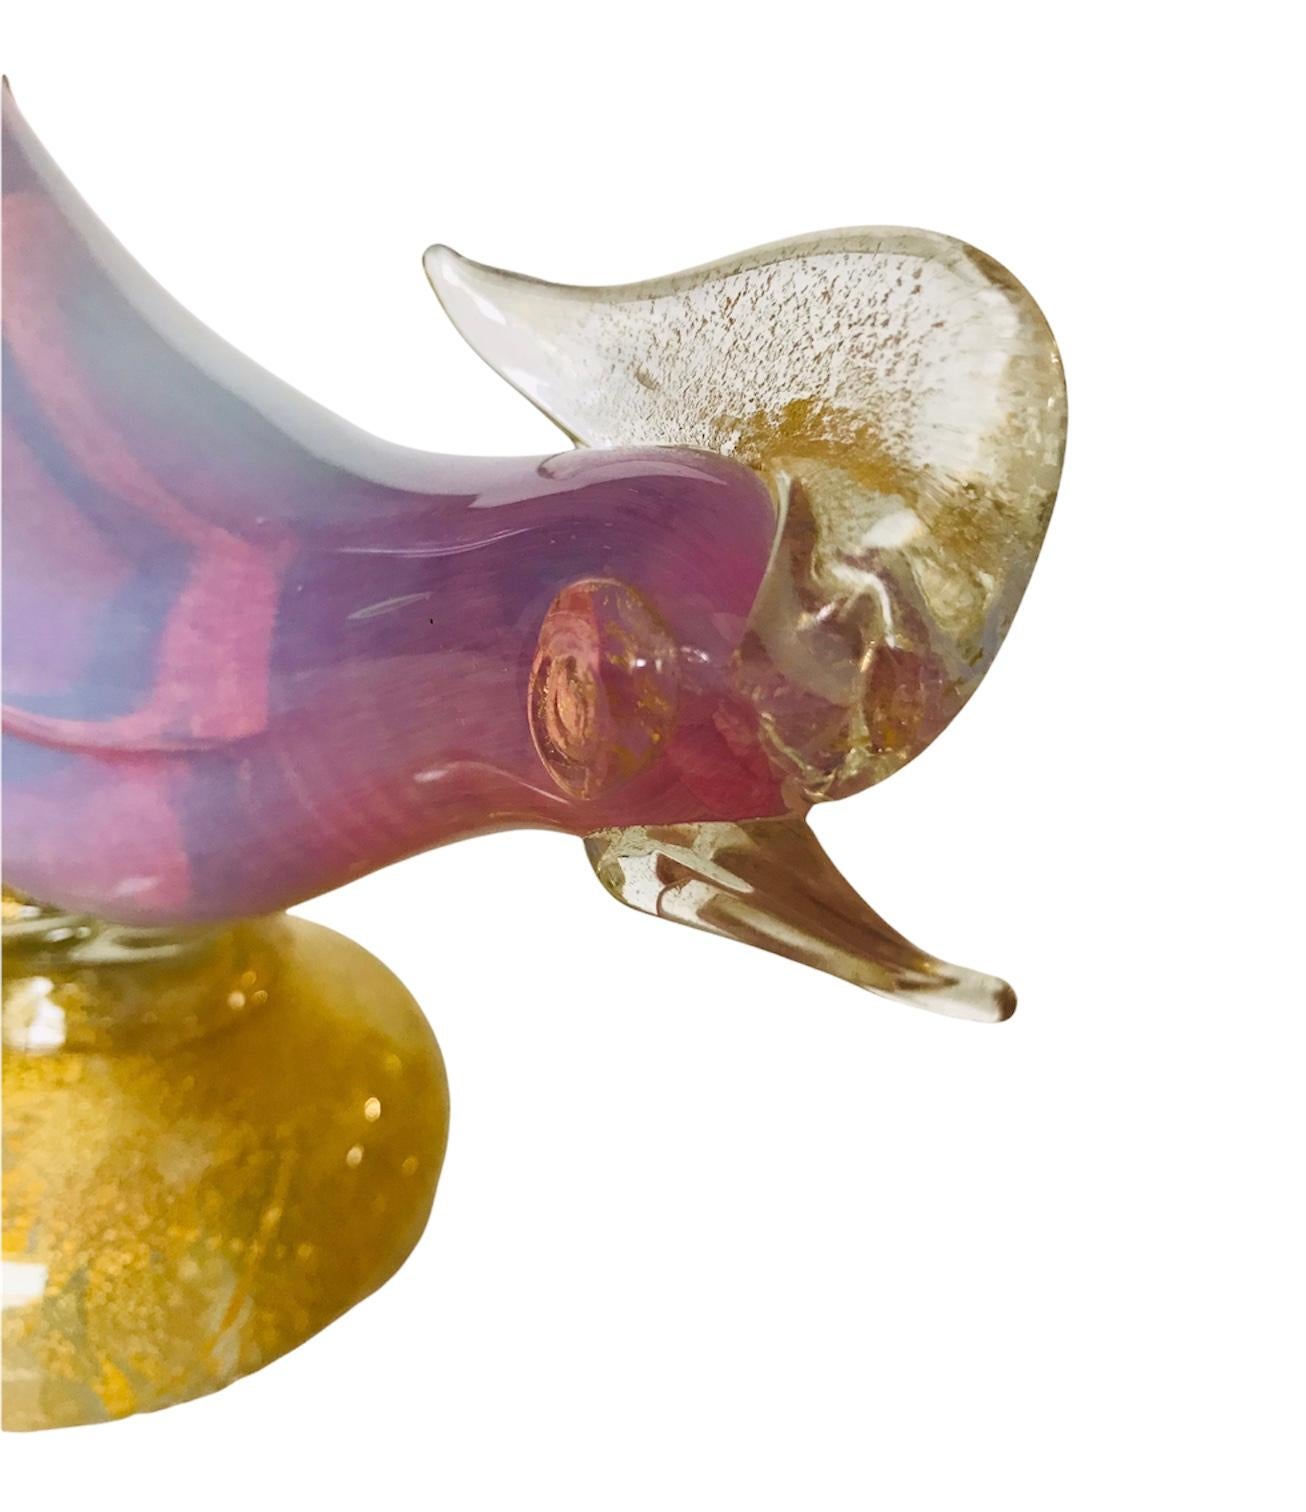 Depending on the refractions of light the 50’s Italian Murano glass pheasant will represent an iridescent shade of light pink or blue. Gold flecks are placed sporadically in the plume, eyes, beak and the base of the figurine. A fine representation